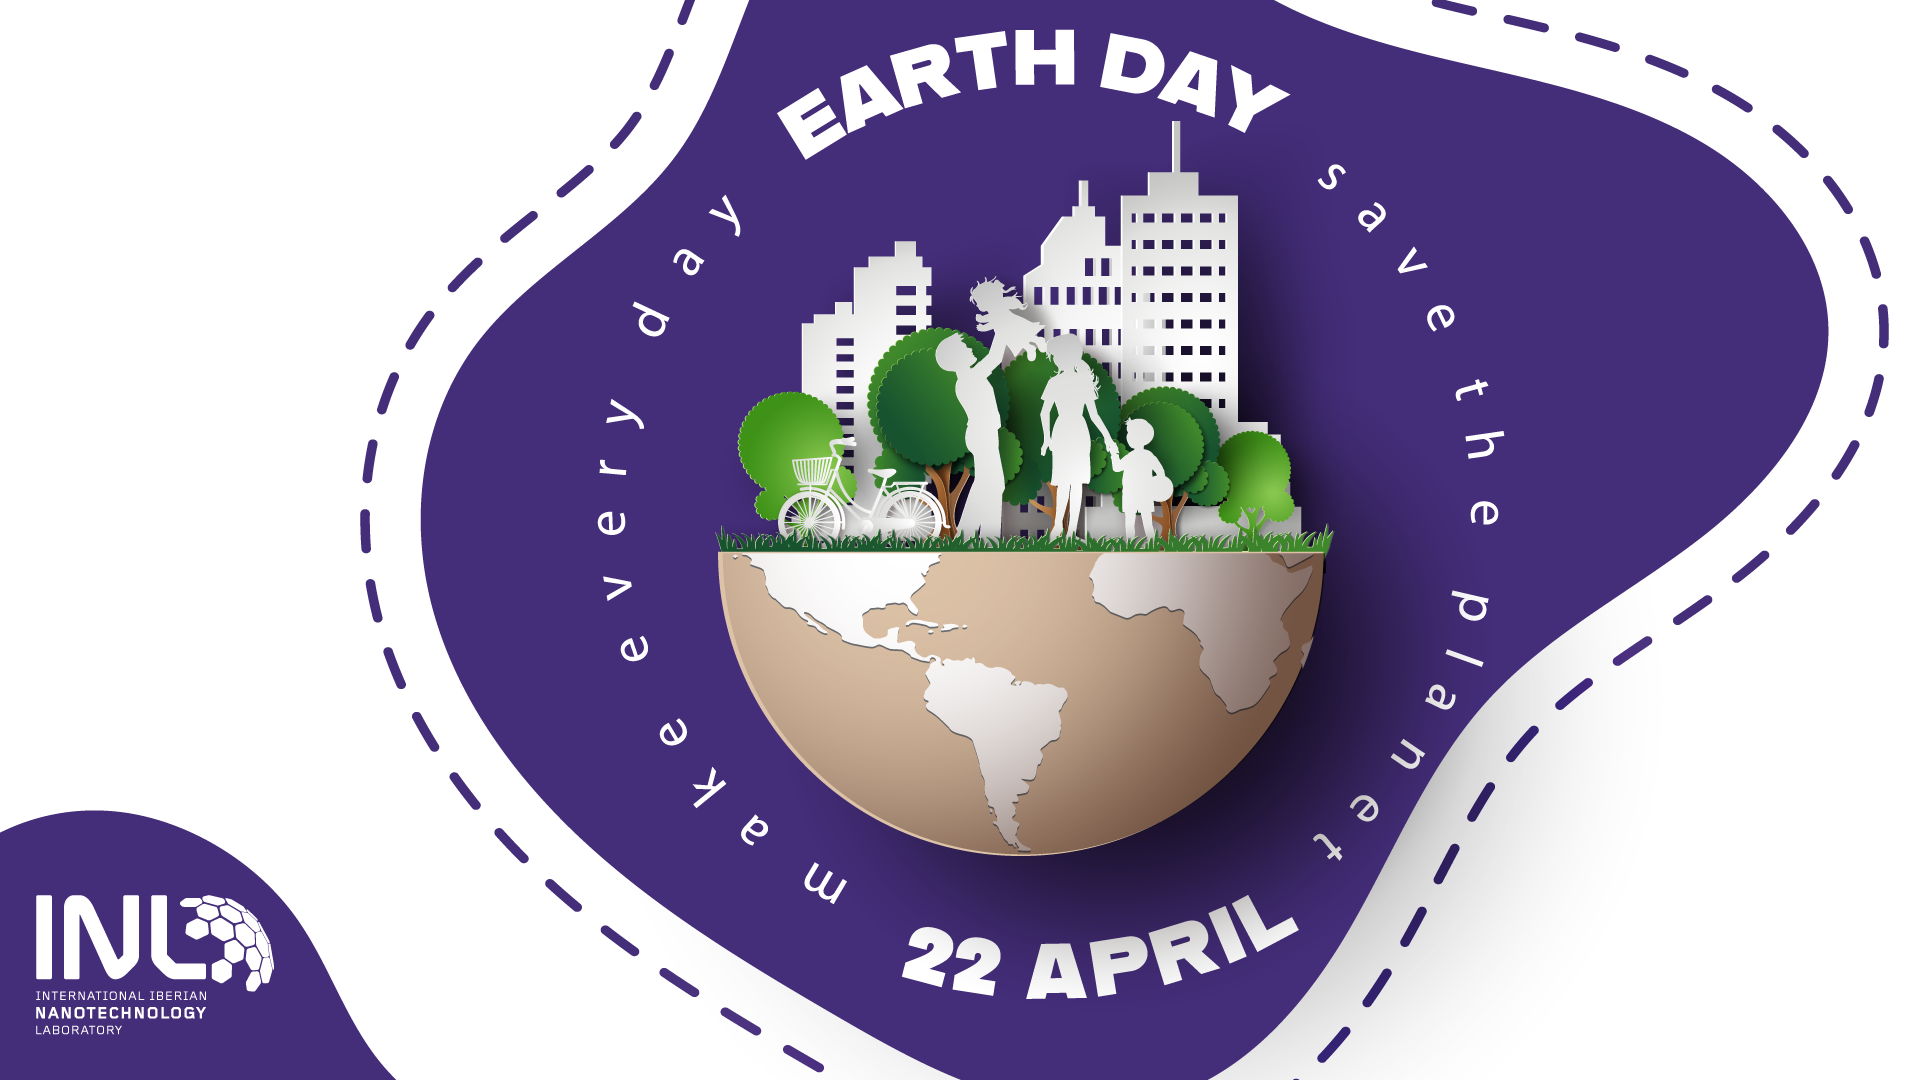 INL makes every day Earth Day